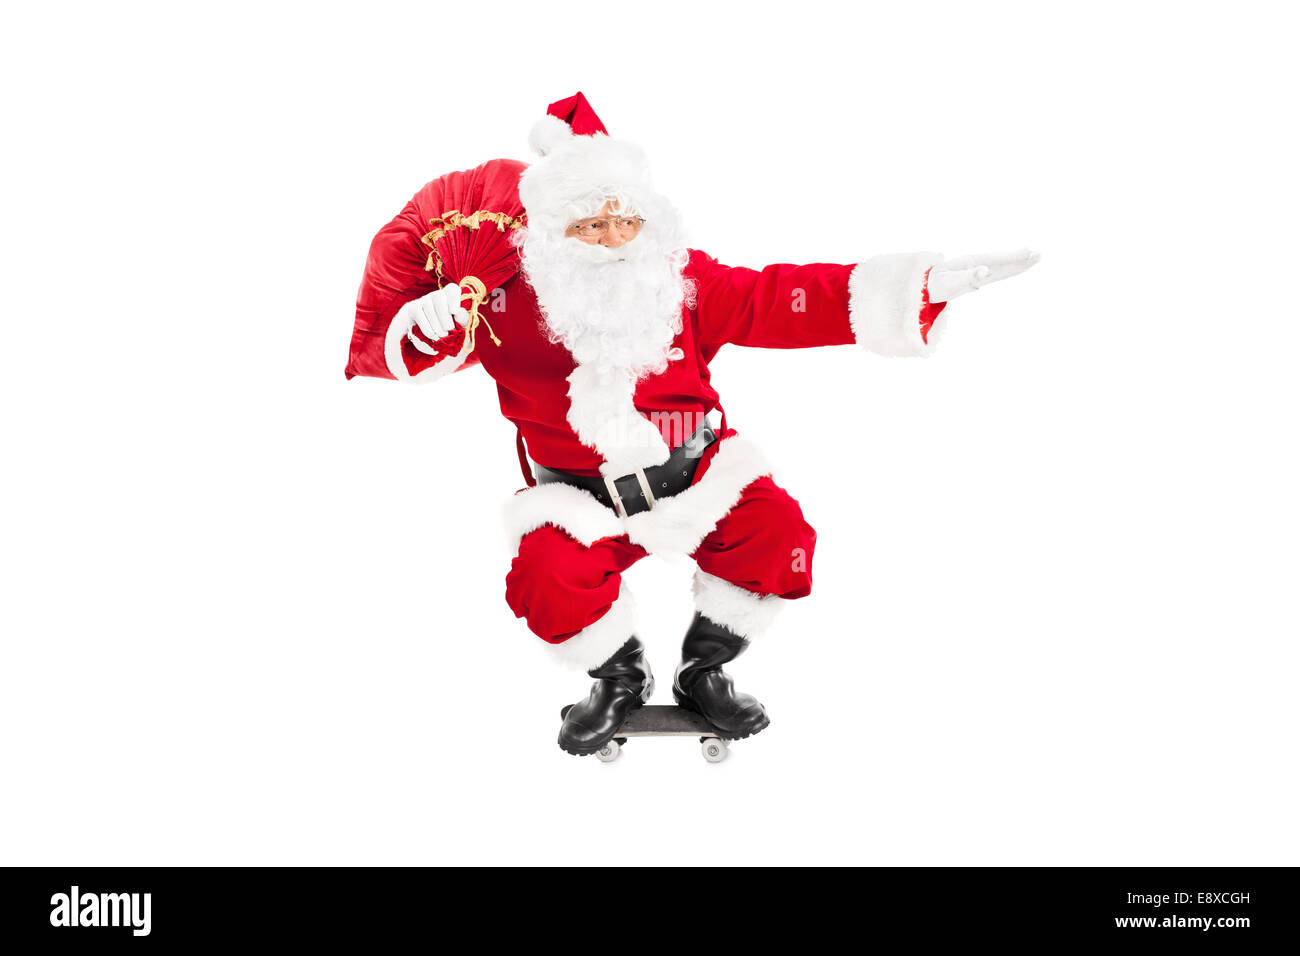 Santa riding a skateboard and holding a bag full of presents isolated on white background Stock Photo